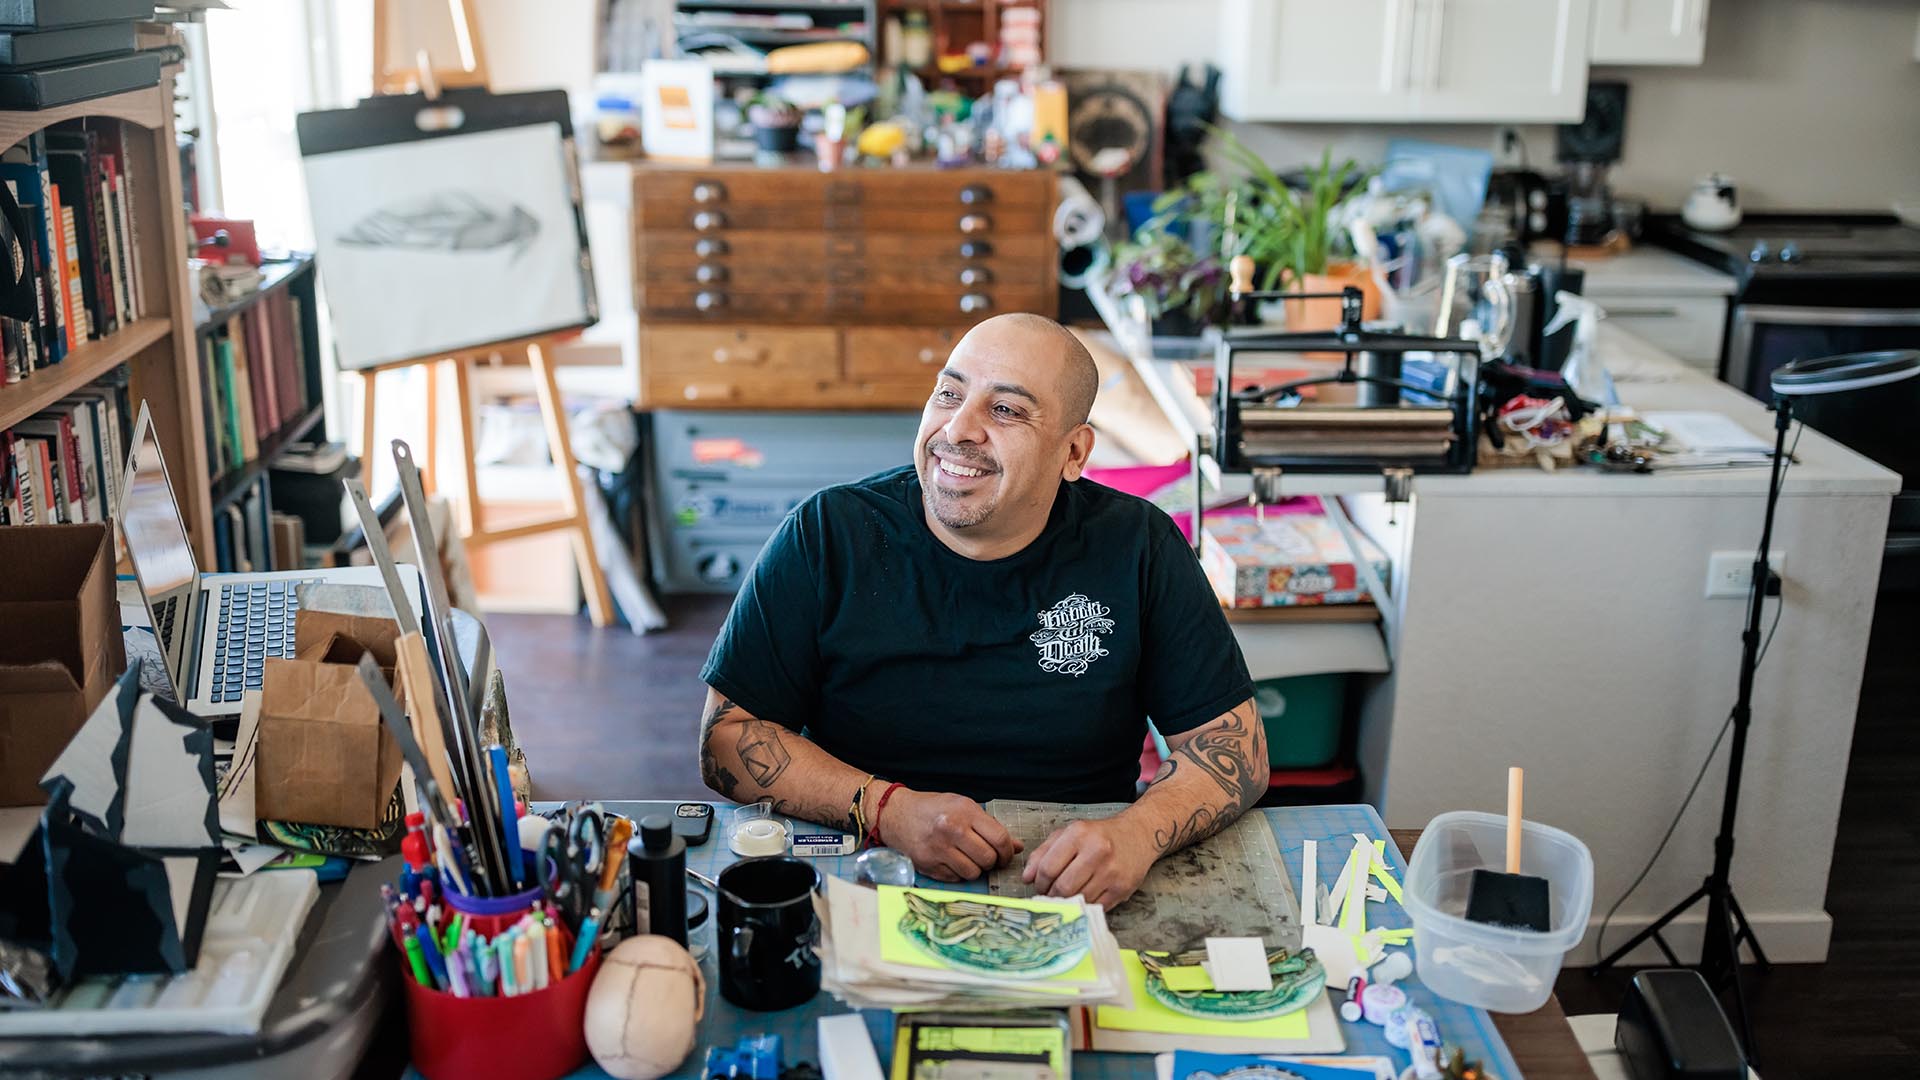 Colorado printmaker and paraplegic inspires students with his story of resilience